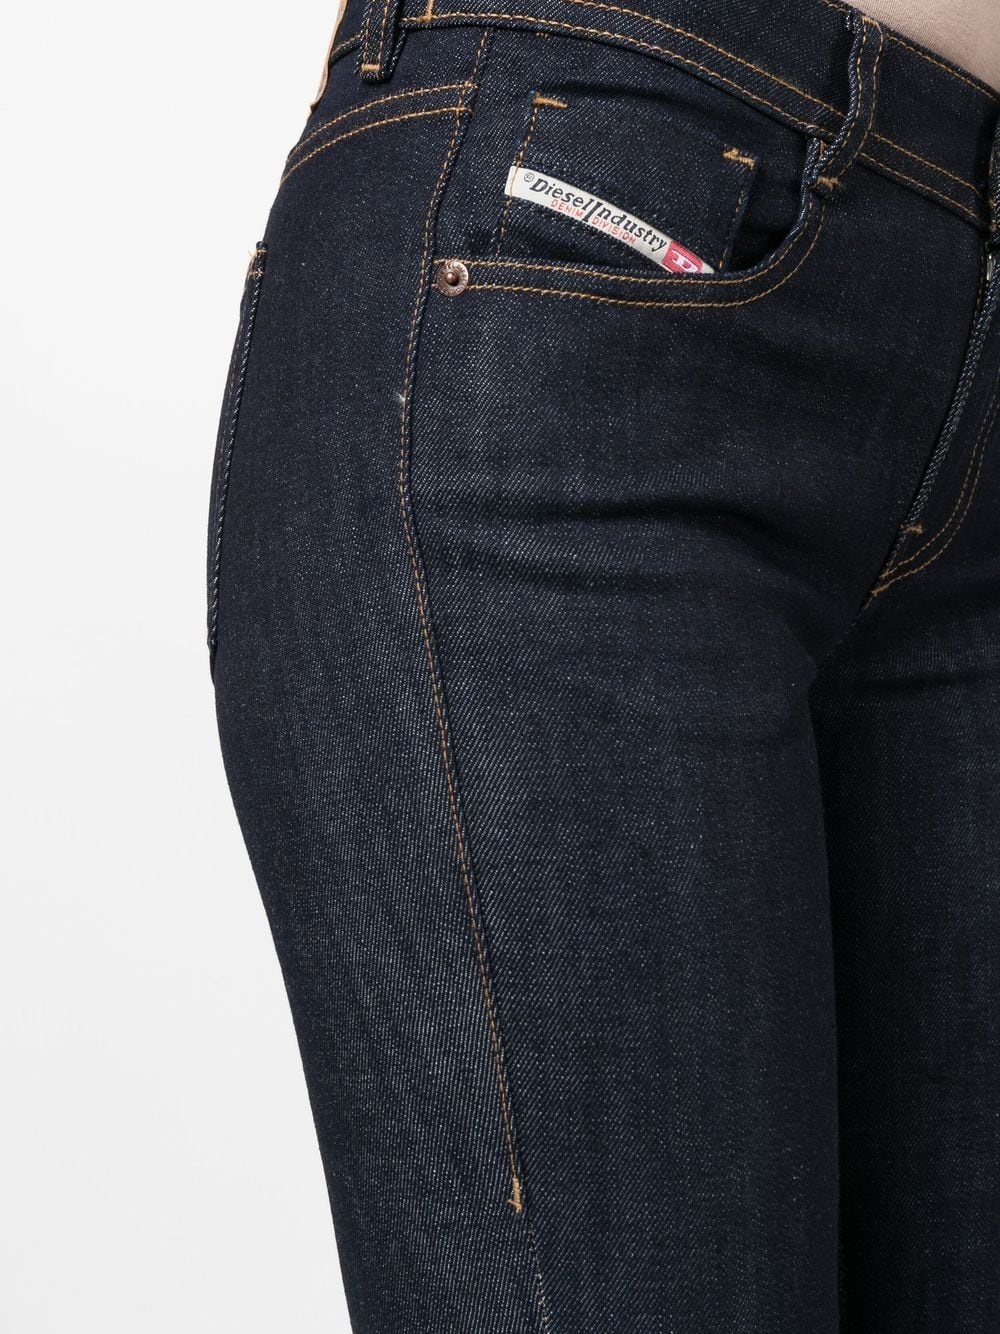 mid-rise bootcut jeans - 5